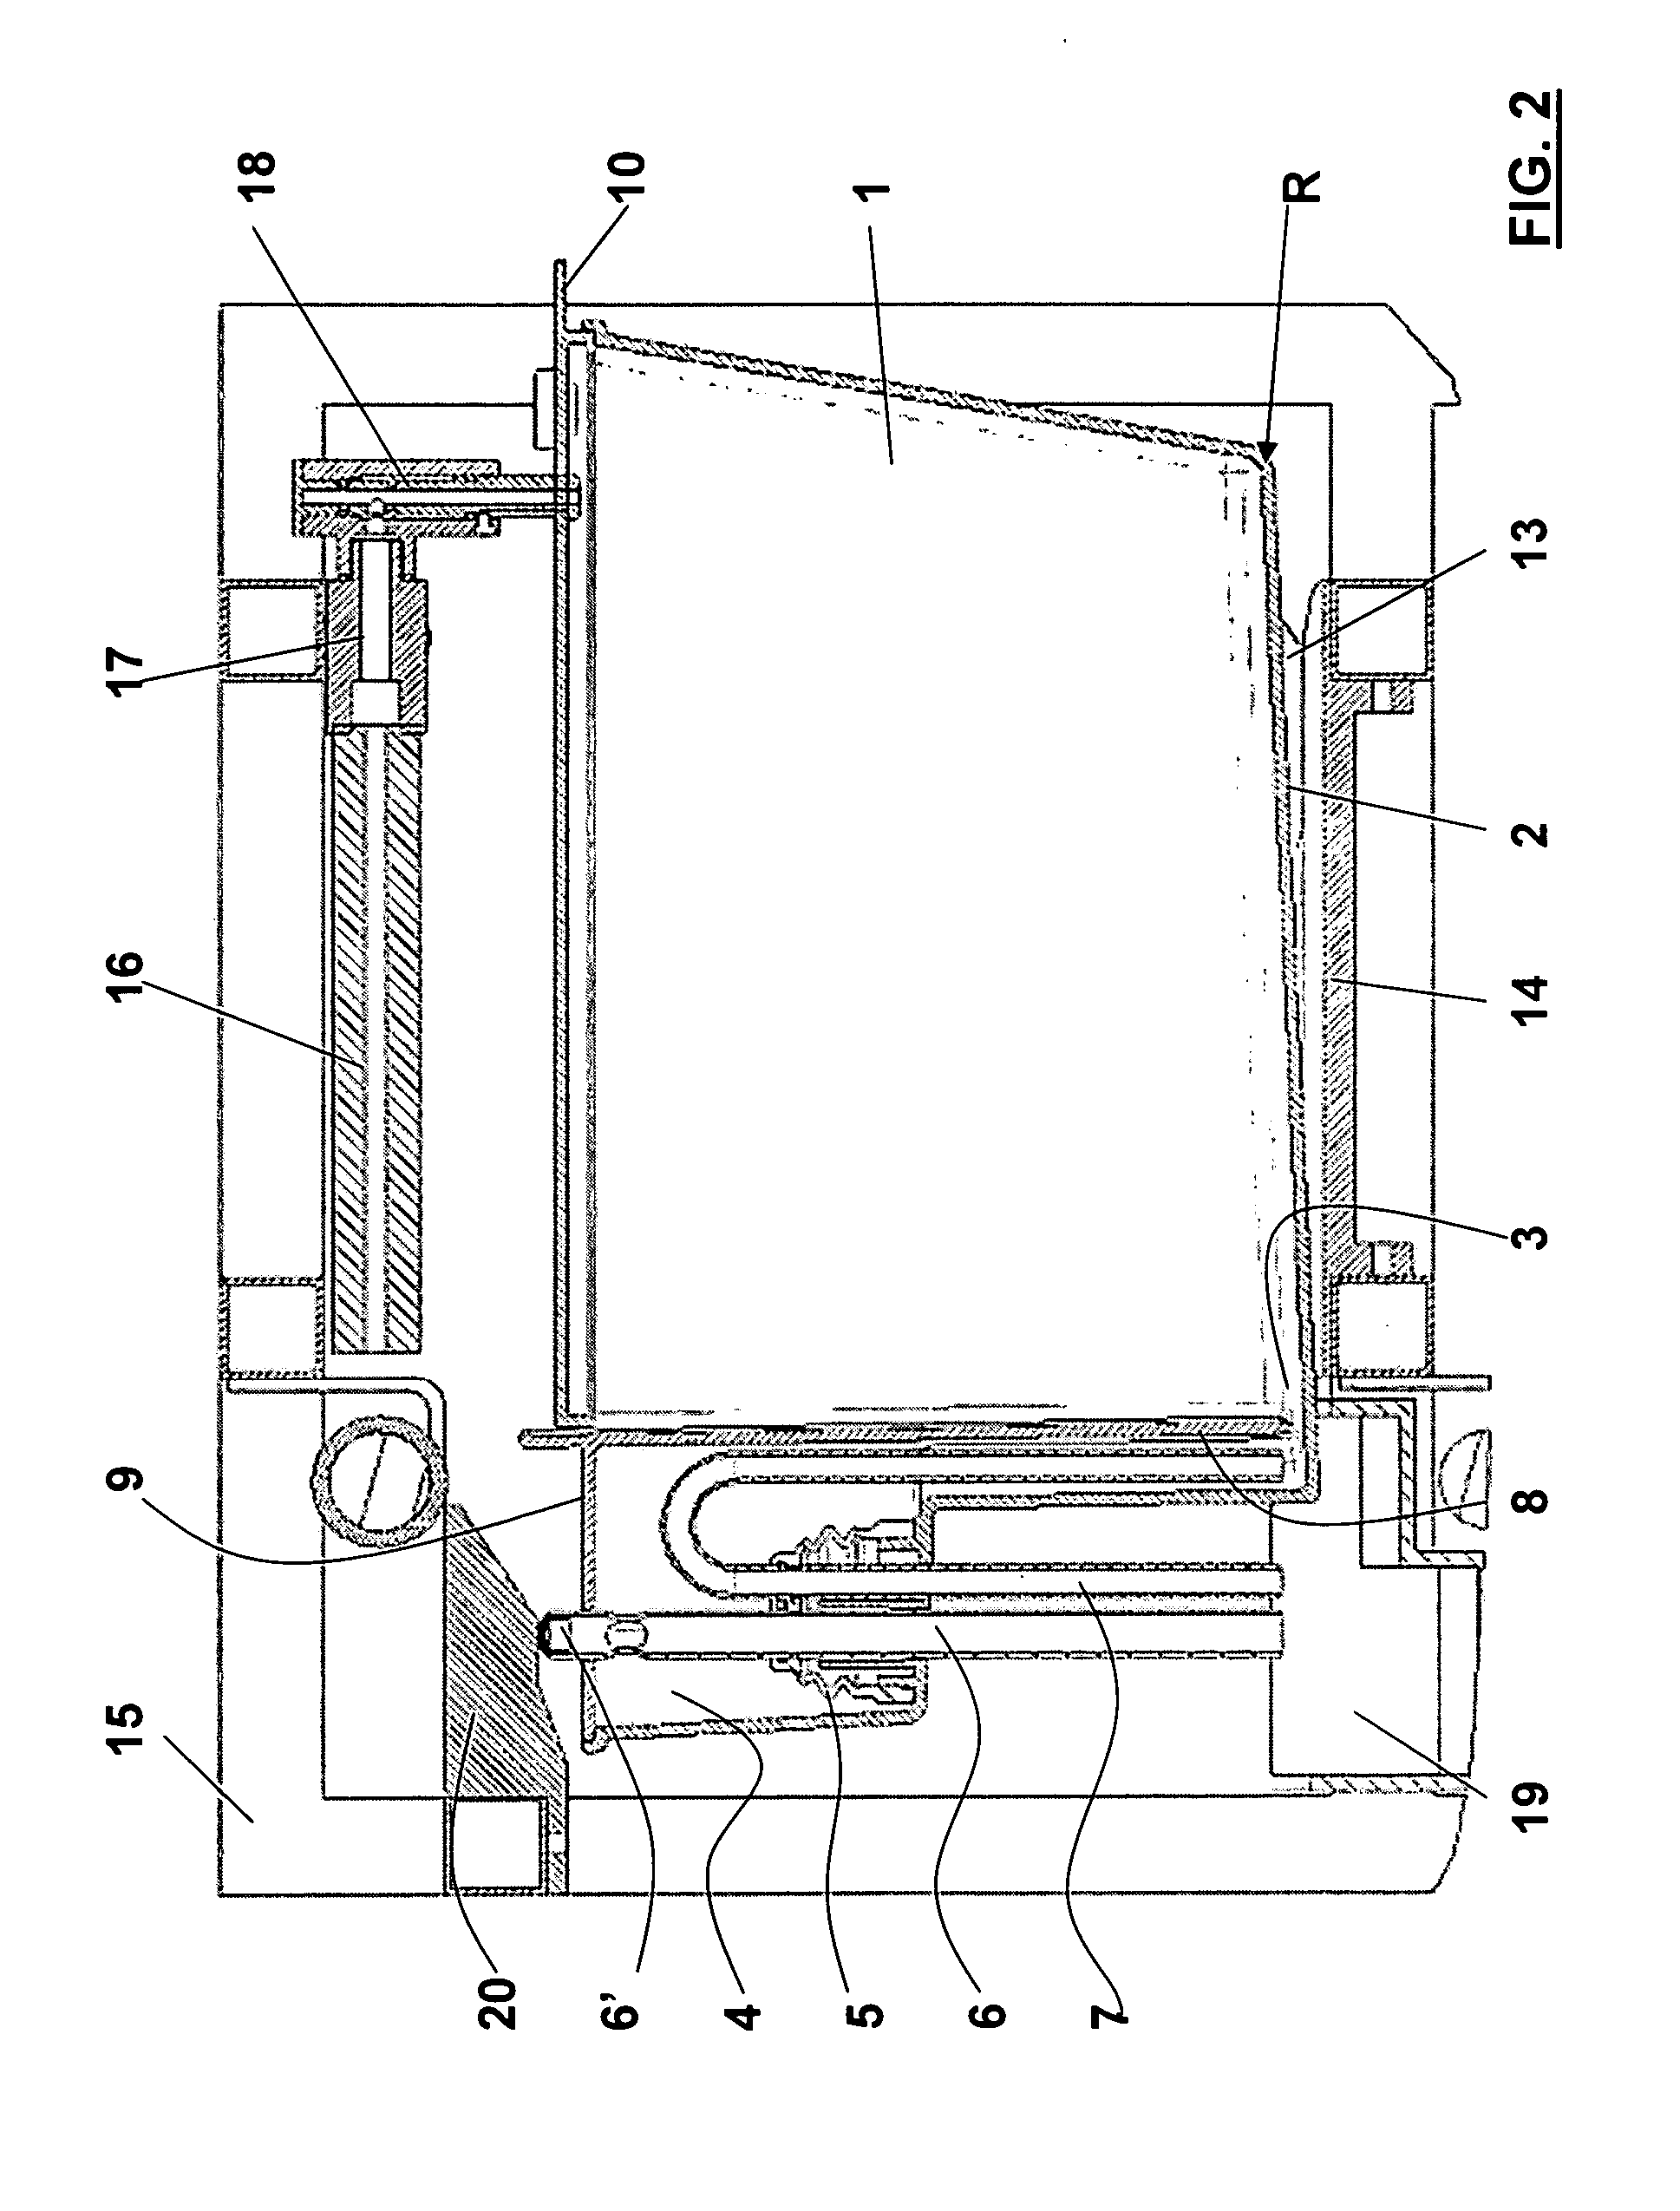 Basin capable of containing aquatic animals, especially experimental animals, and relating housing system